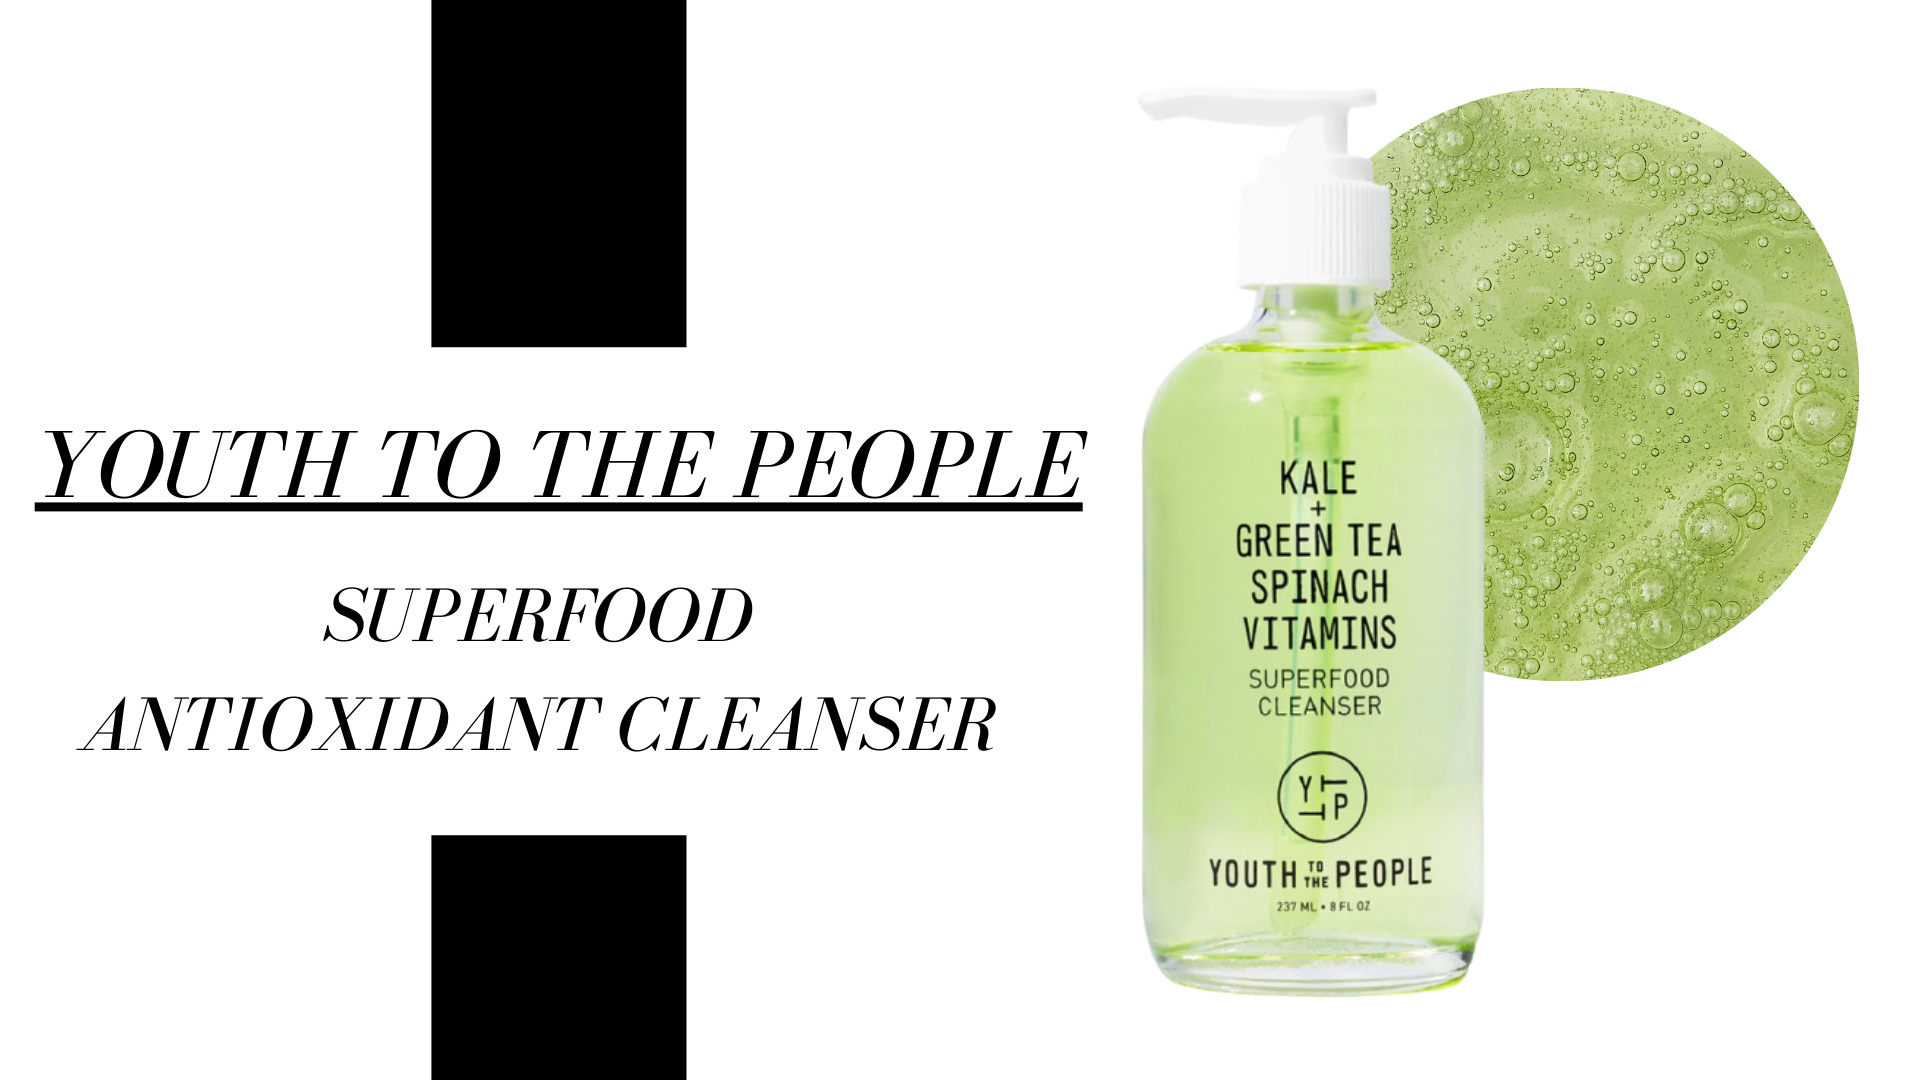 This cleanser is also amazing. It is a sustainable product that we highly recommend checking out. We did a review of this product and others that are from this brand in a previous article that could be interesting for you to check out! To know more - 10 SUSTAINABLE BEAUTY PRODUCTS